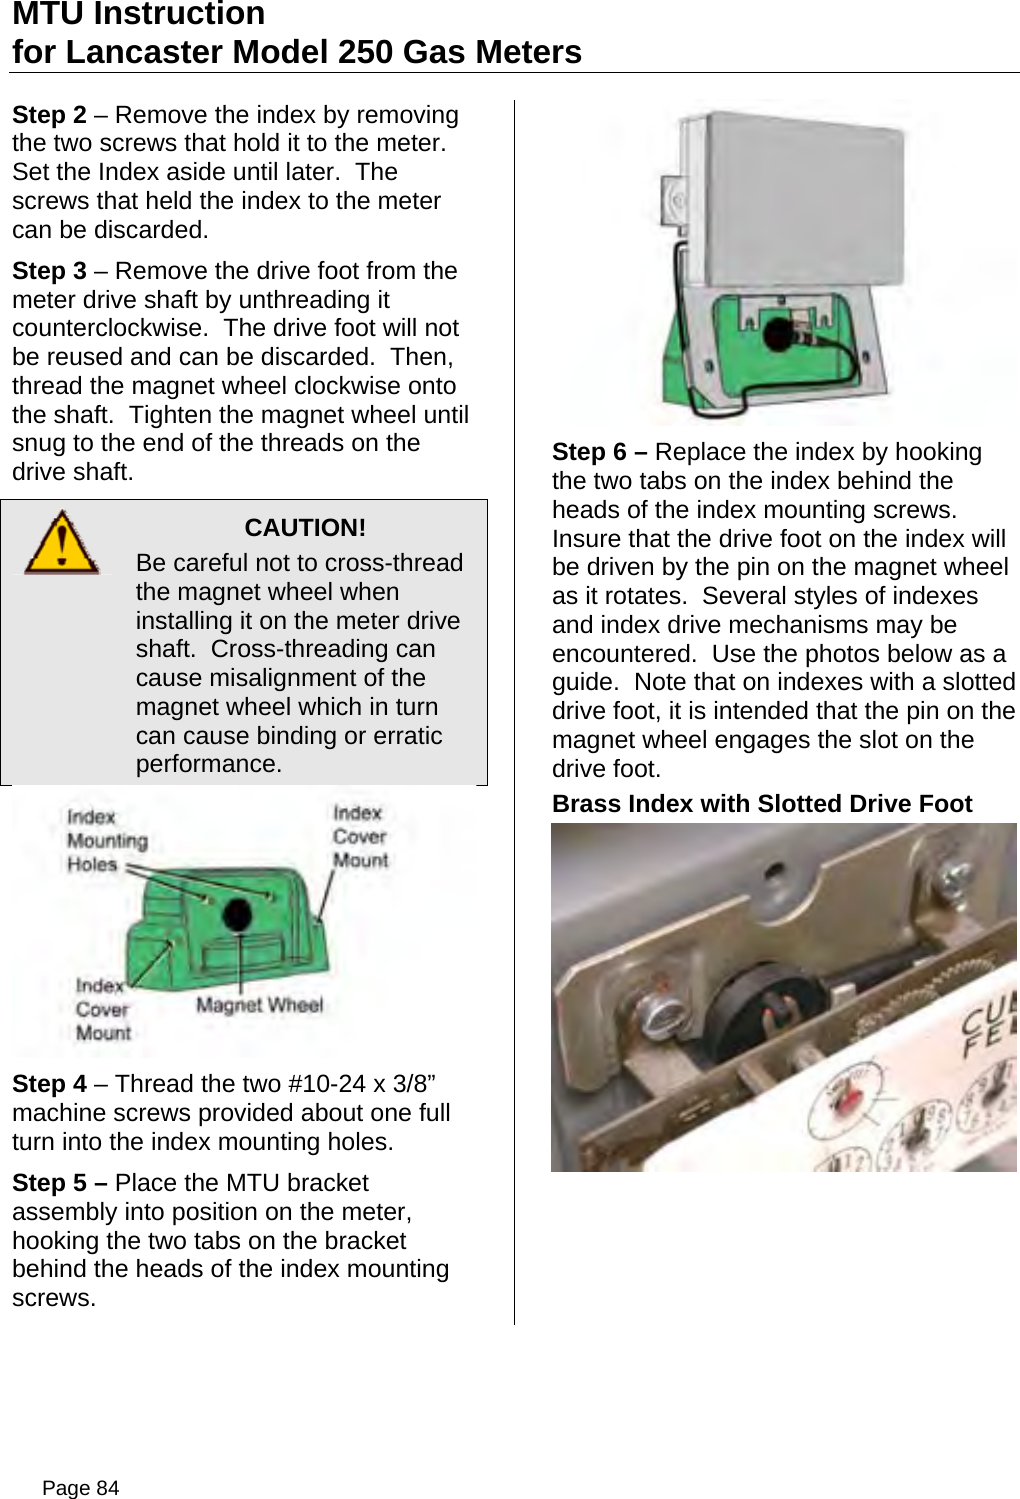 Page 84 of Aclara Technologies 09015 Transmitter for Meter Reading User Manual users manual